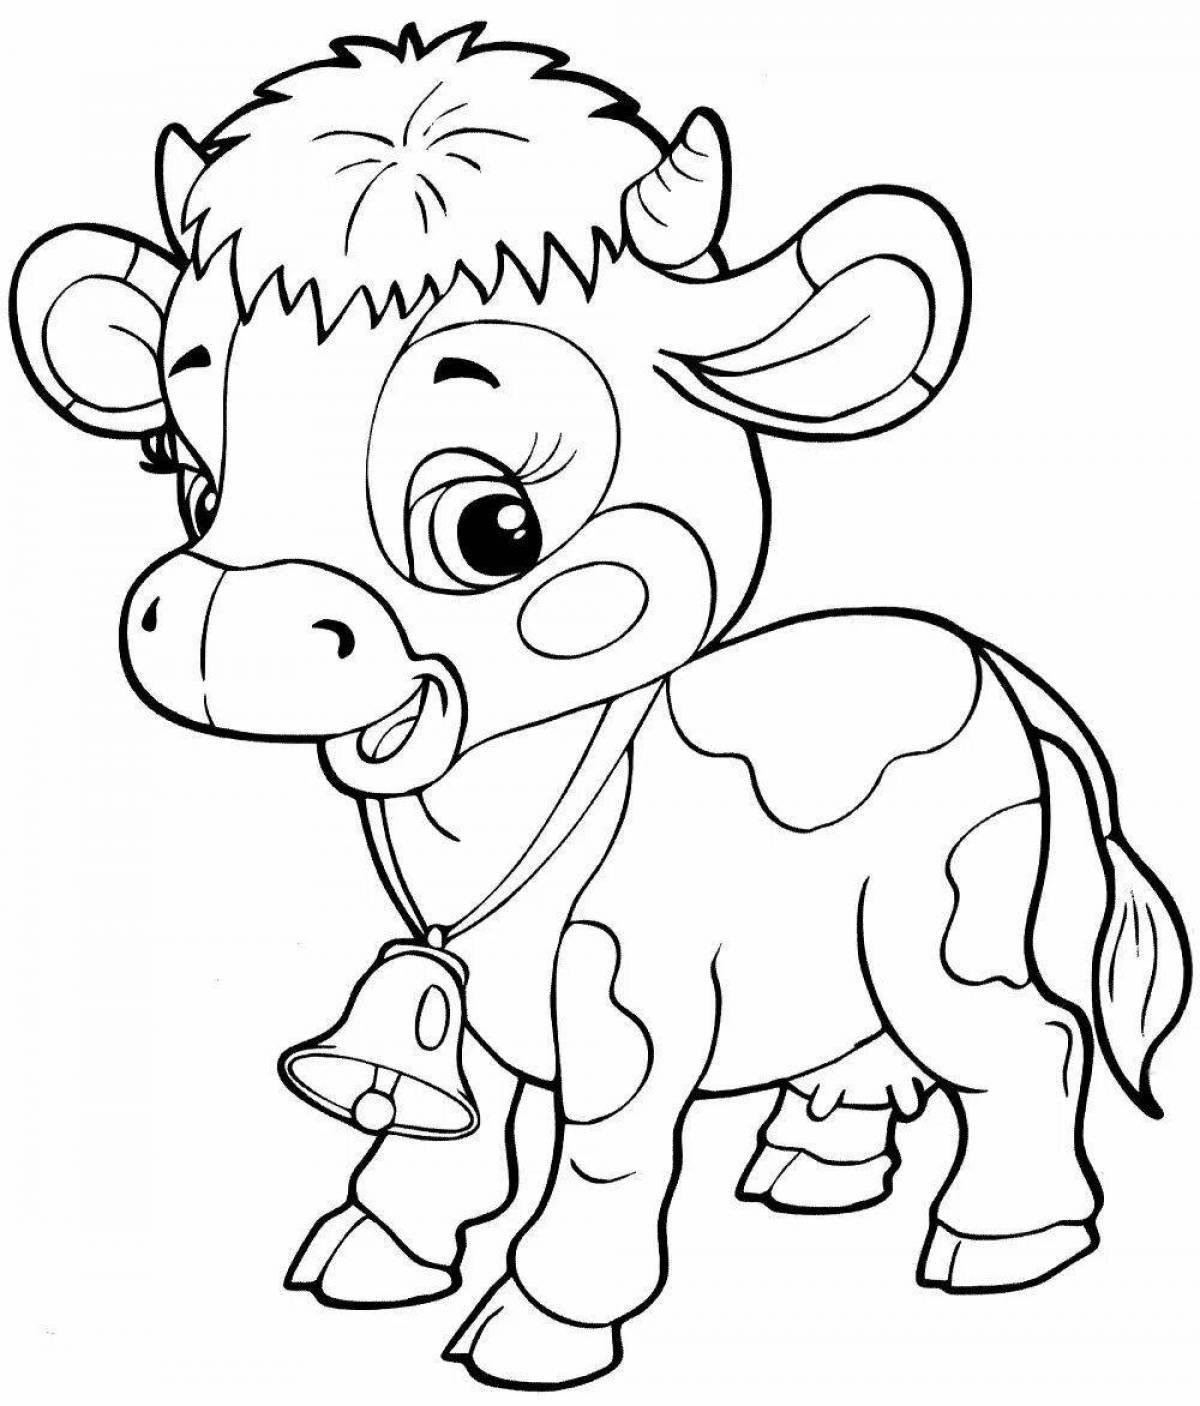 Cute cow coloring book for 3-4 year olds